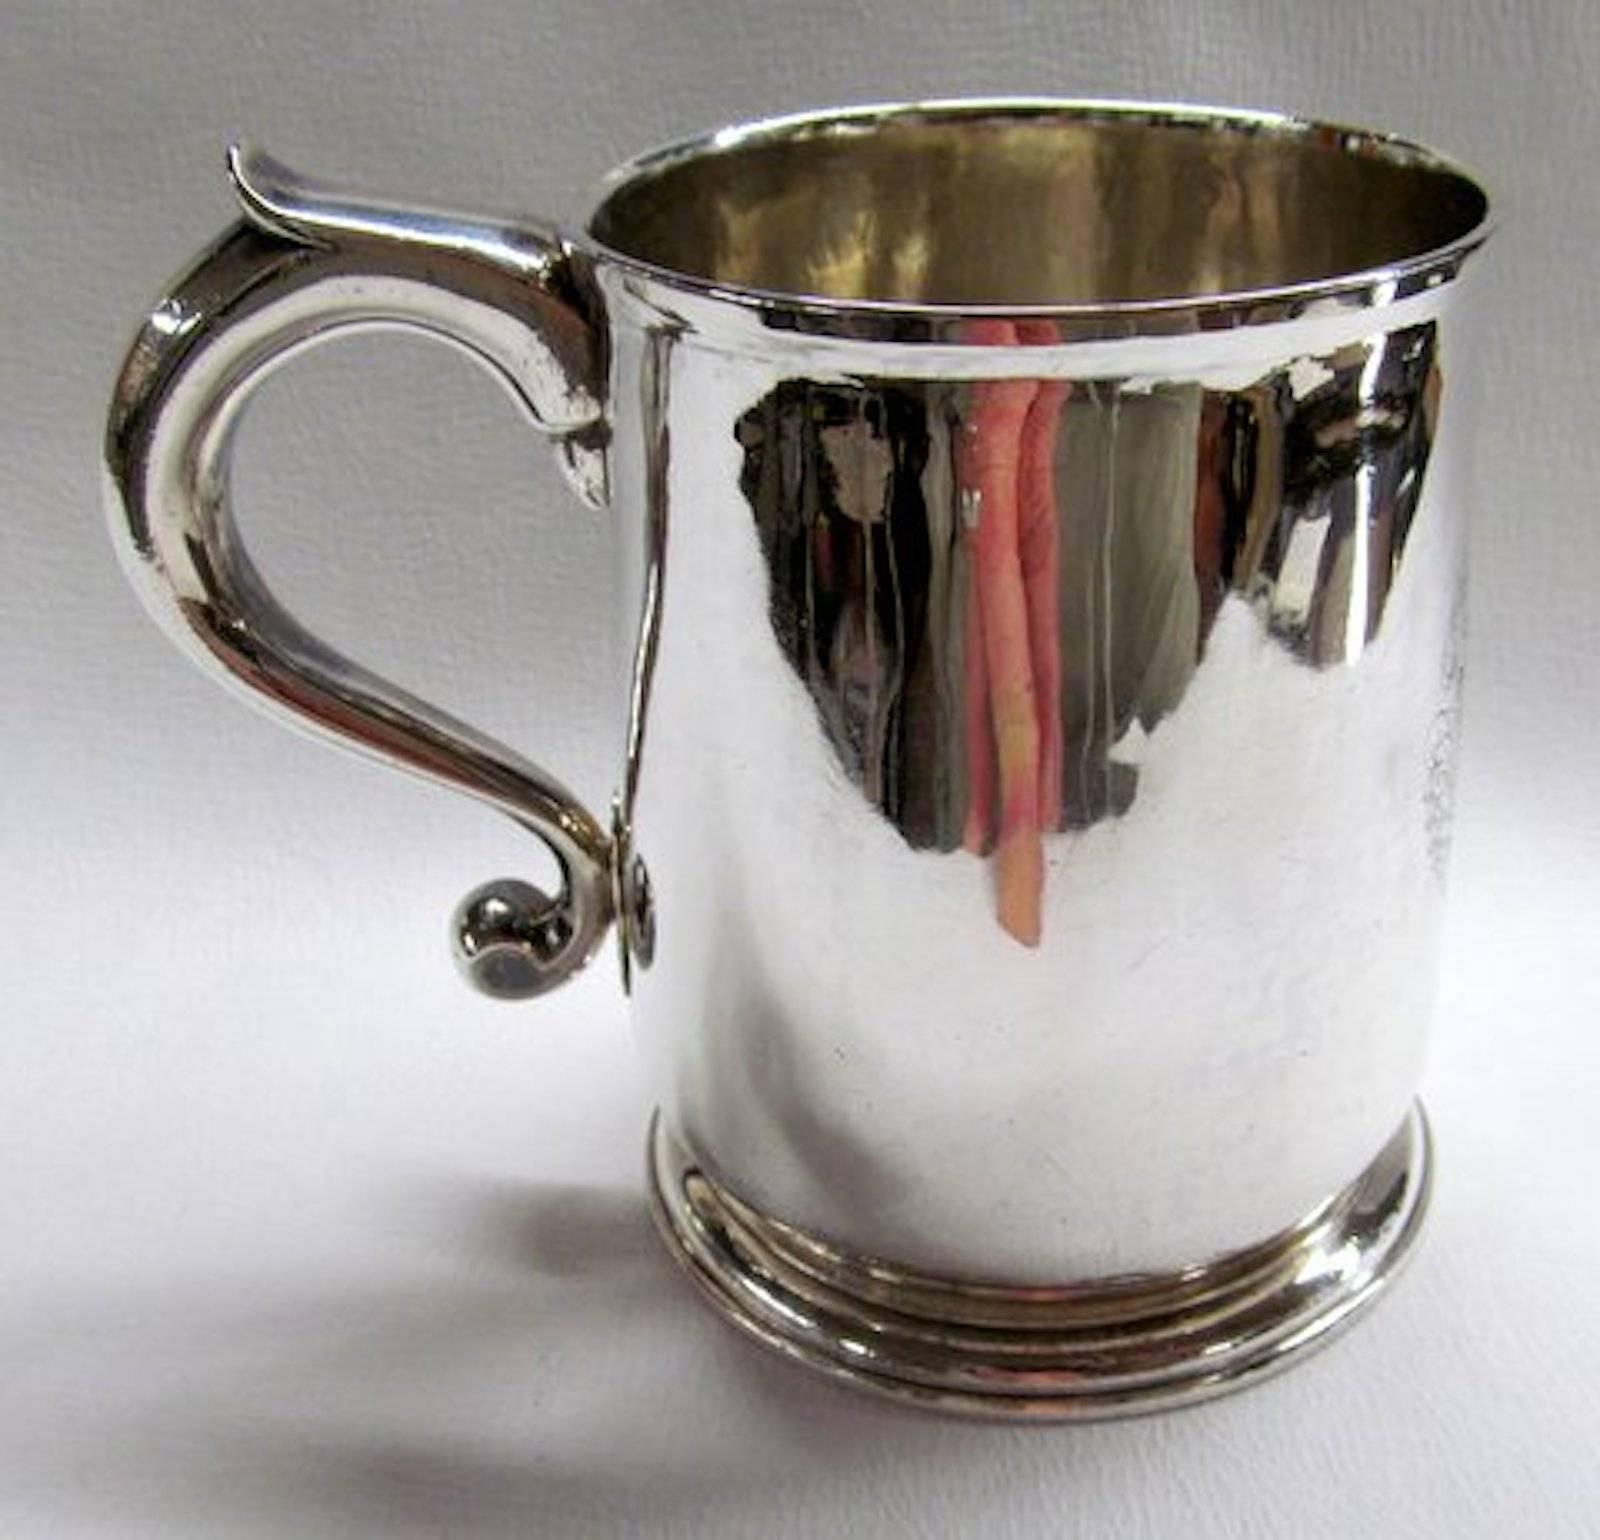 Very Rare Britannia Standard Early Tankard, George I, London 1718/1719, William Fleming Britannia Standard is .958 pure silver. William Fleming is a highly prized and collected tankard and mug specialist Approx. 10 Troy Ounces.